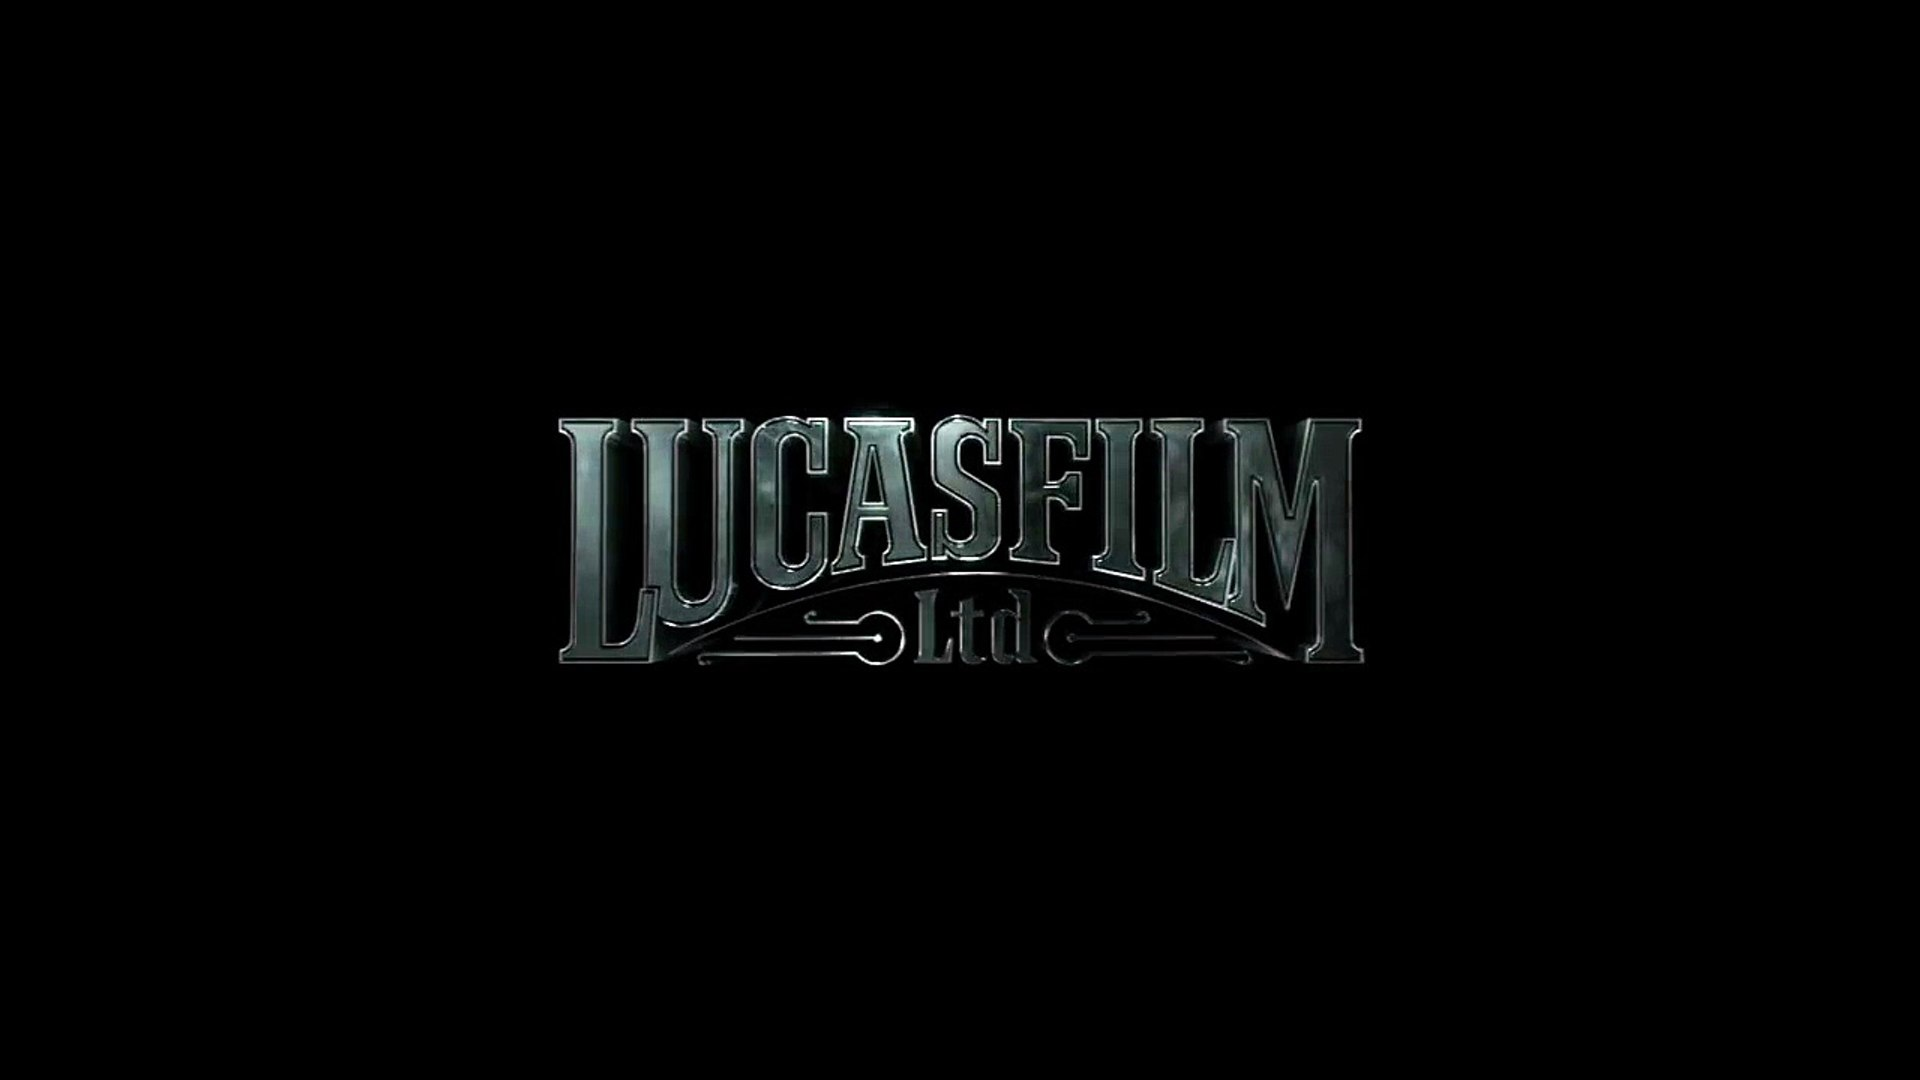 Star Wars beers, wines and cider trademarked by Lucasfilm